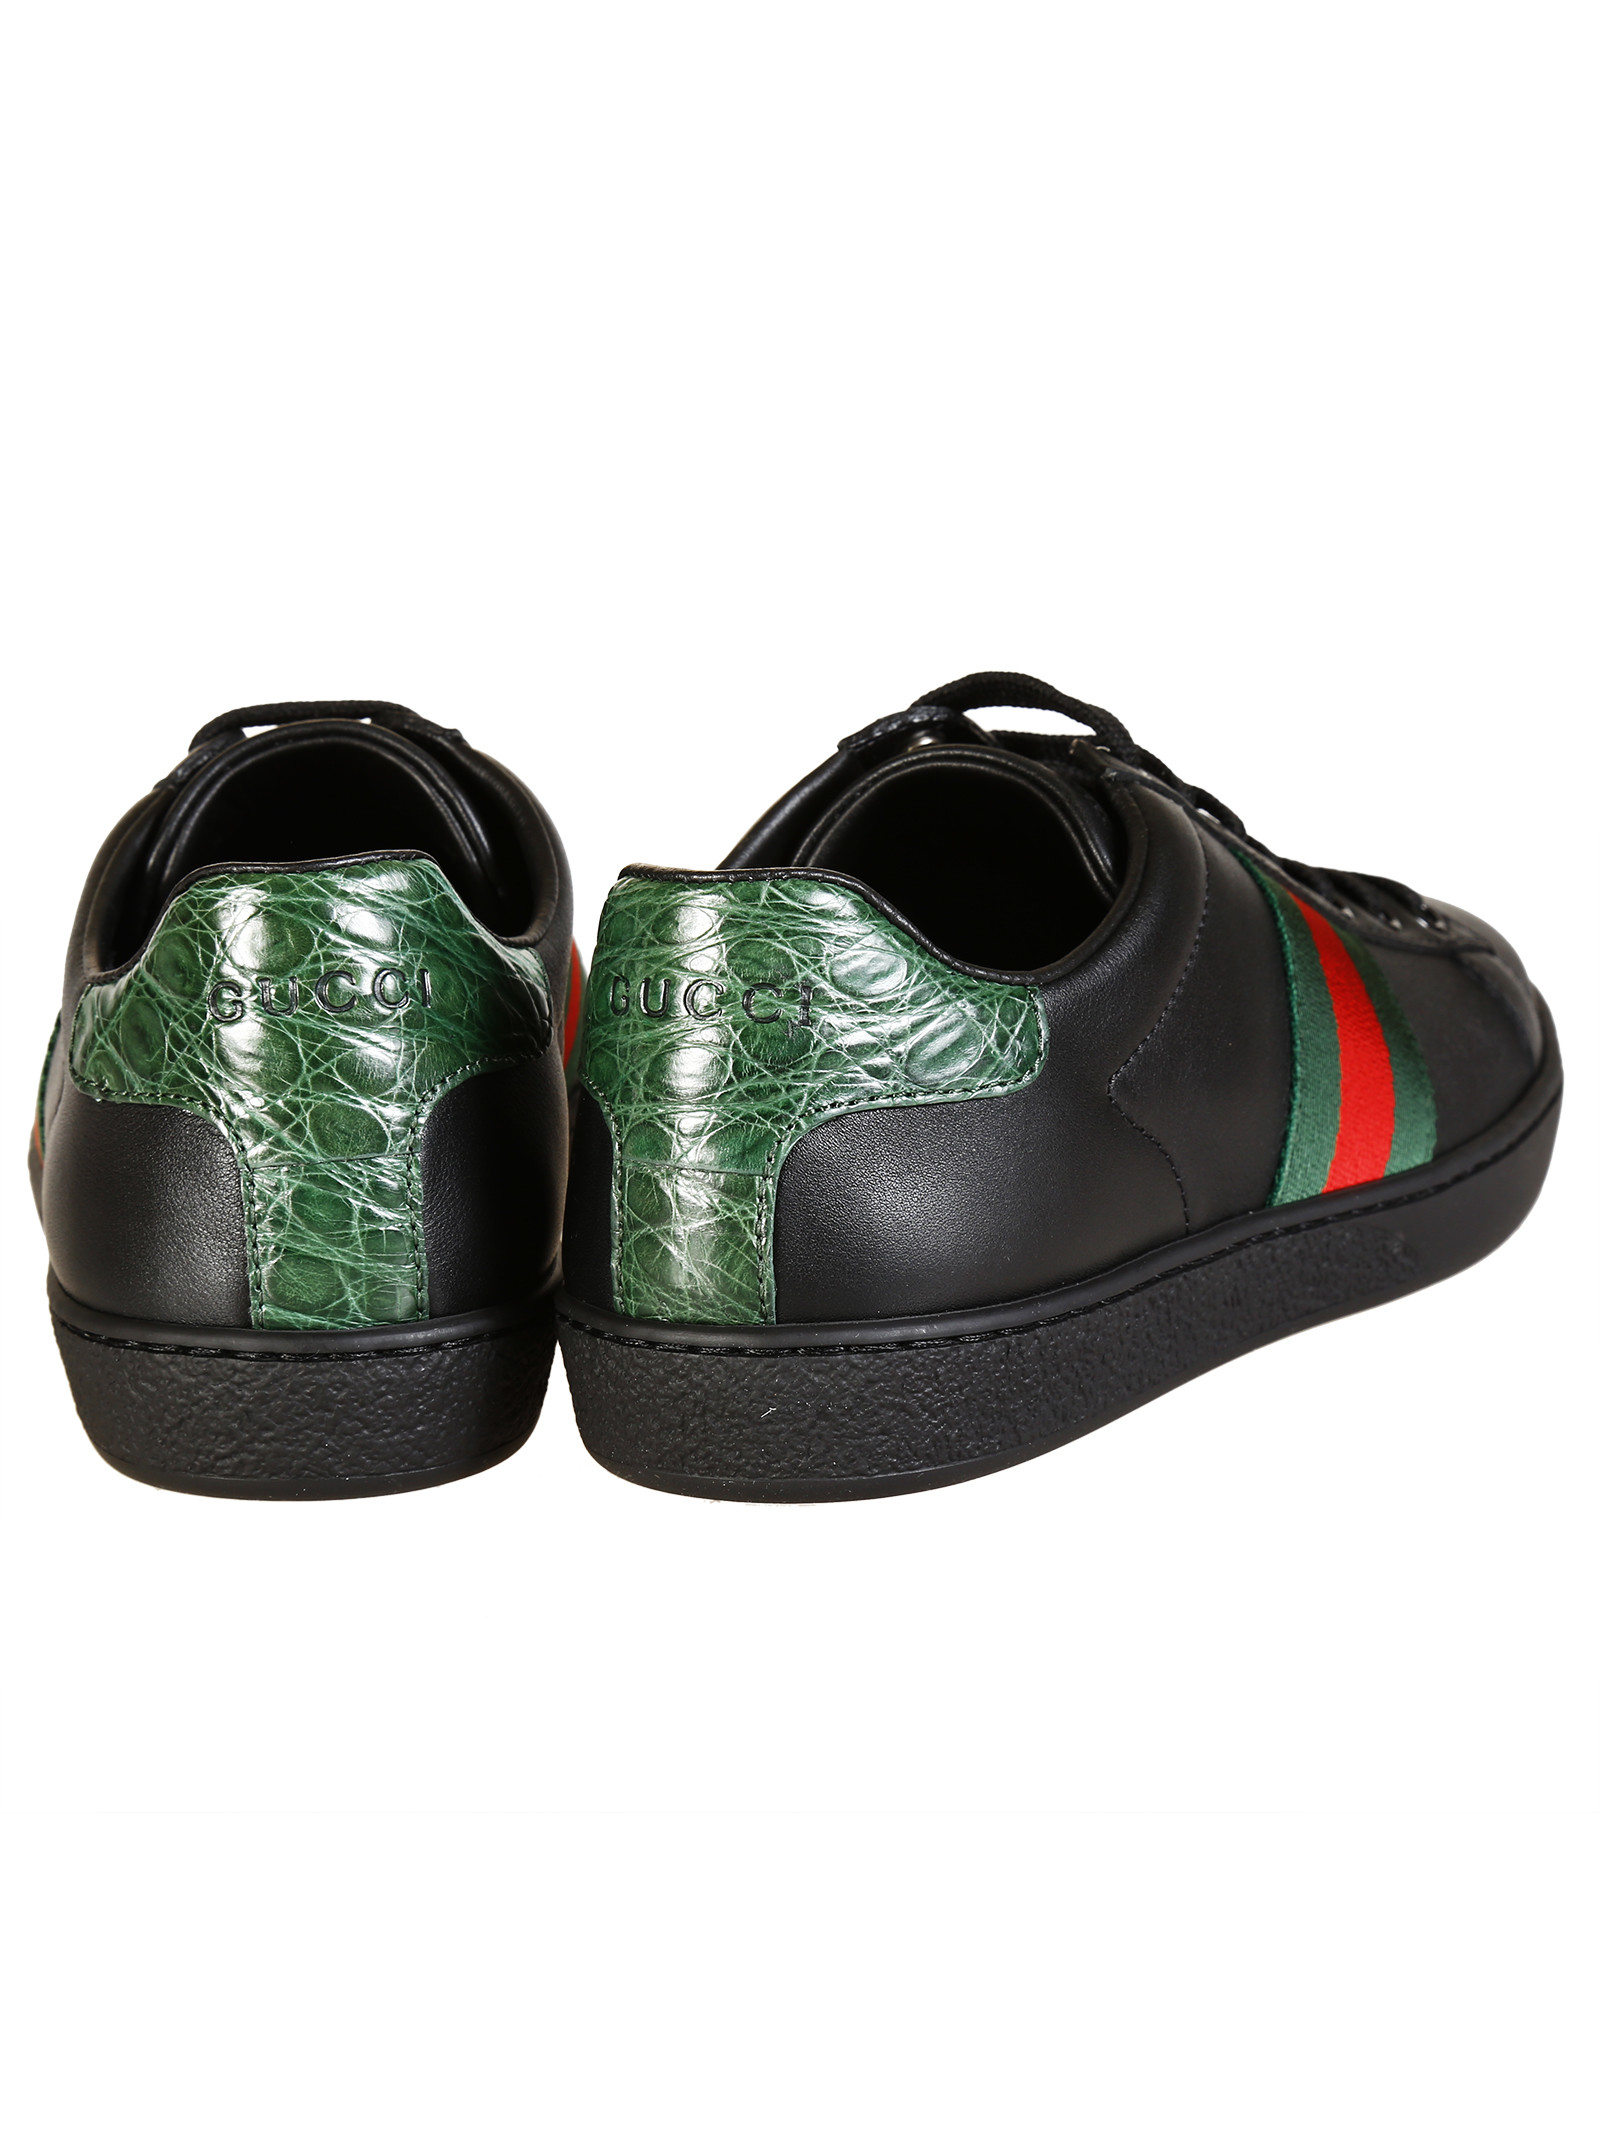 Gucci Leather Sneakers in Black | Lyst